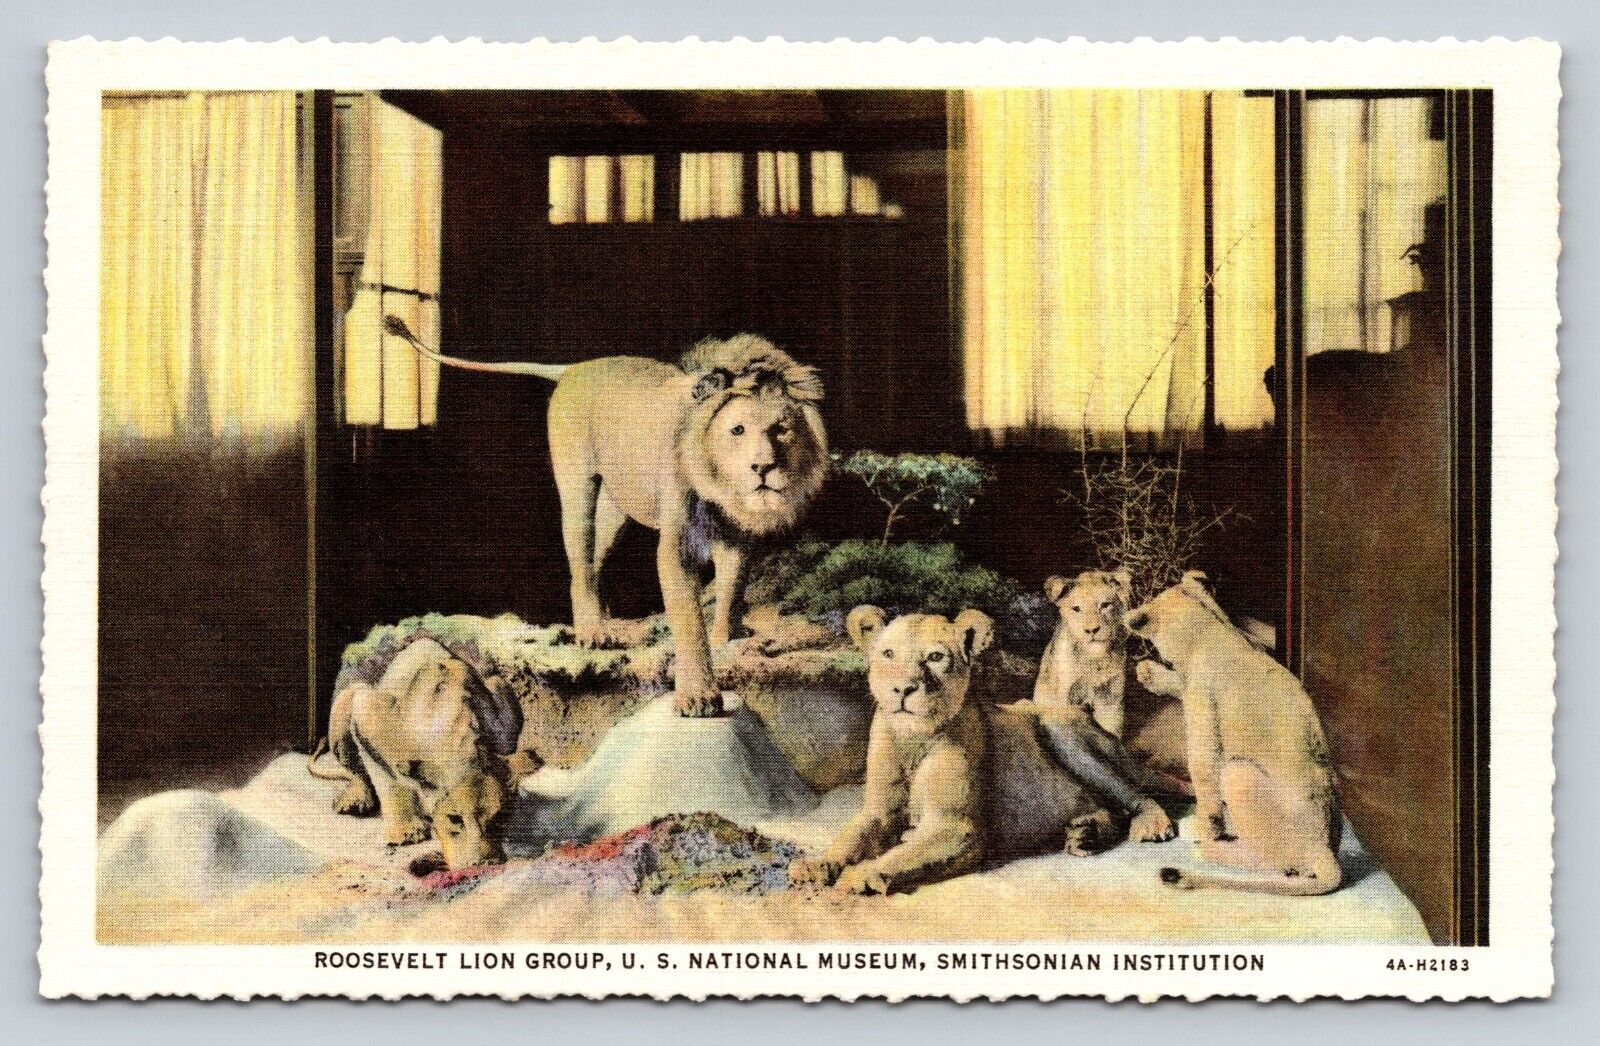 1930s Postcard East African Atlas Lions Smithsonian African Expedition 1909-1910